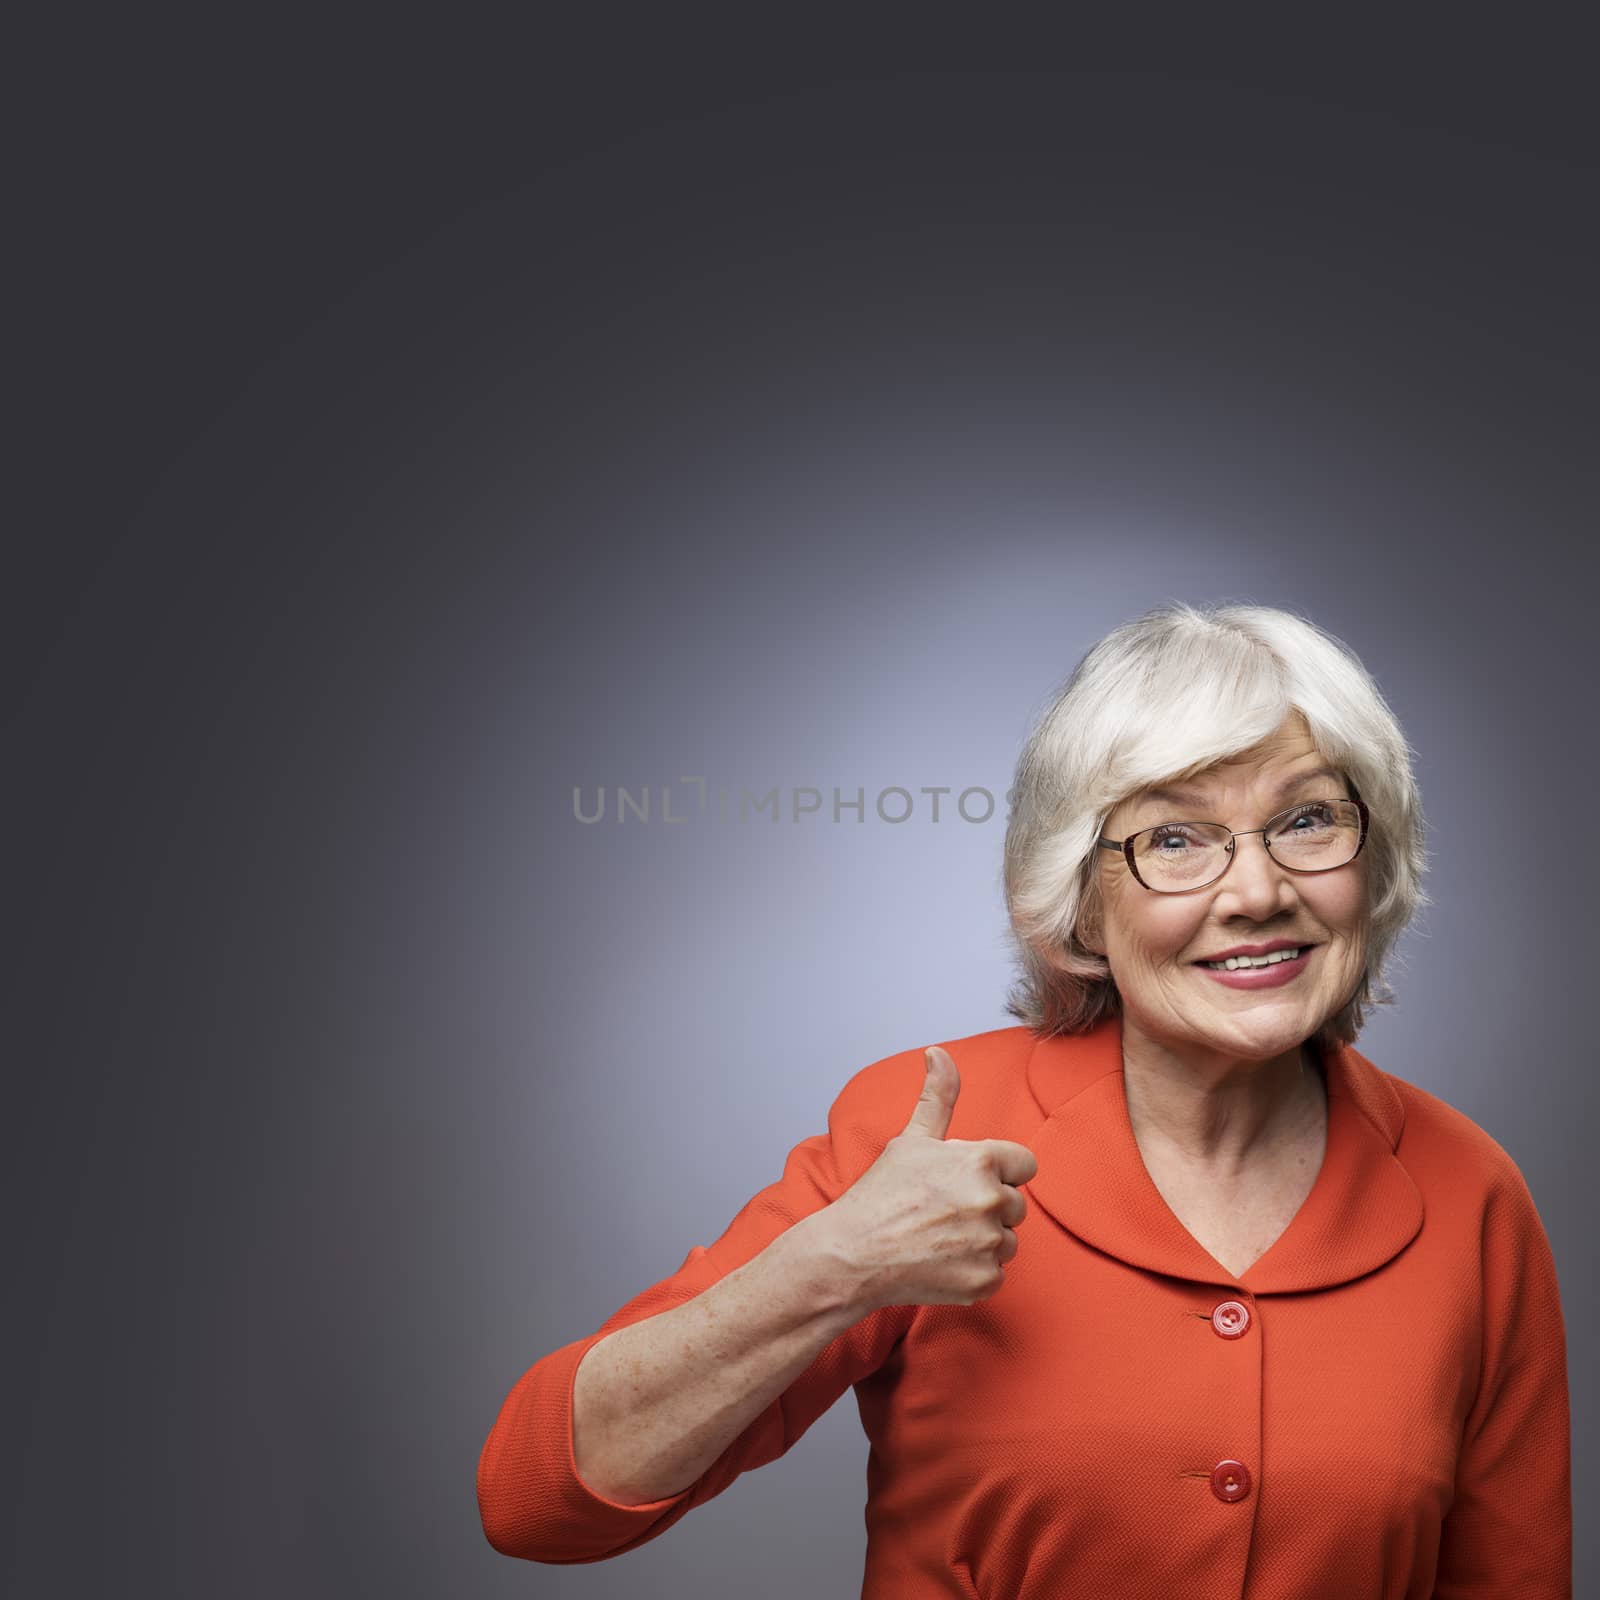 Smiling senior lady showing thumb up sign on gray background with copy space